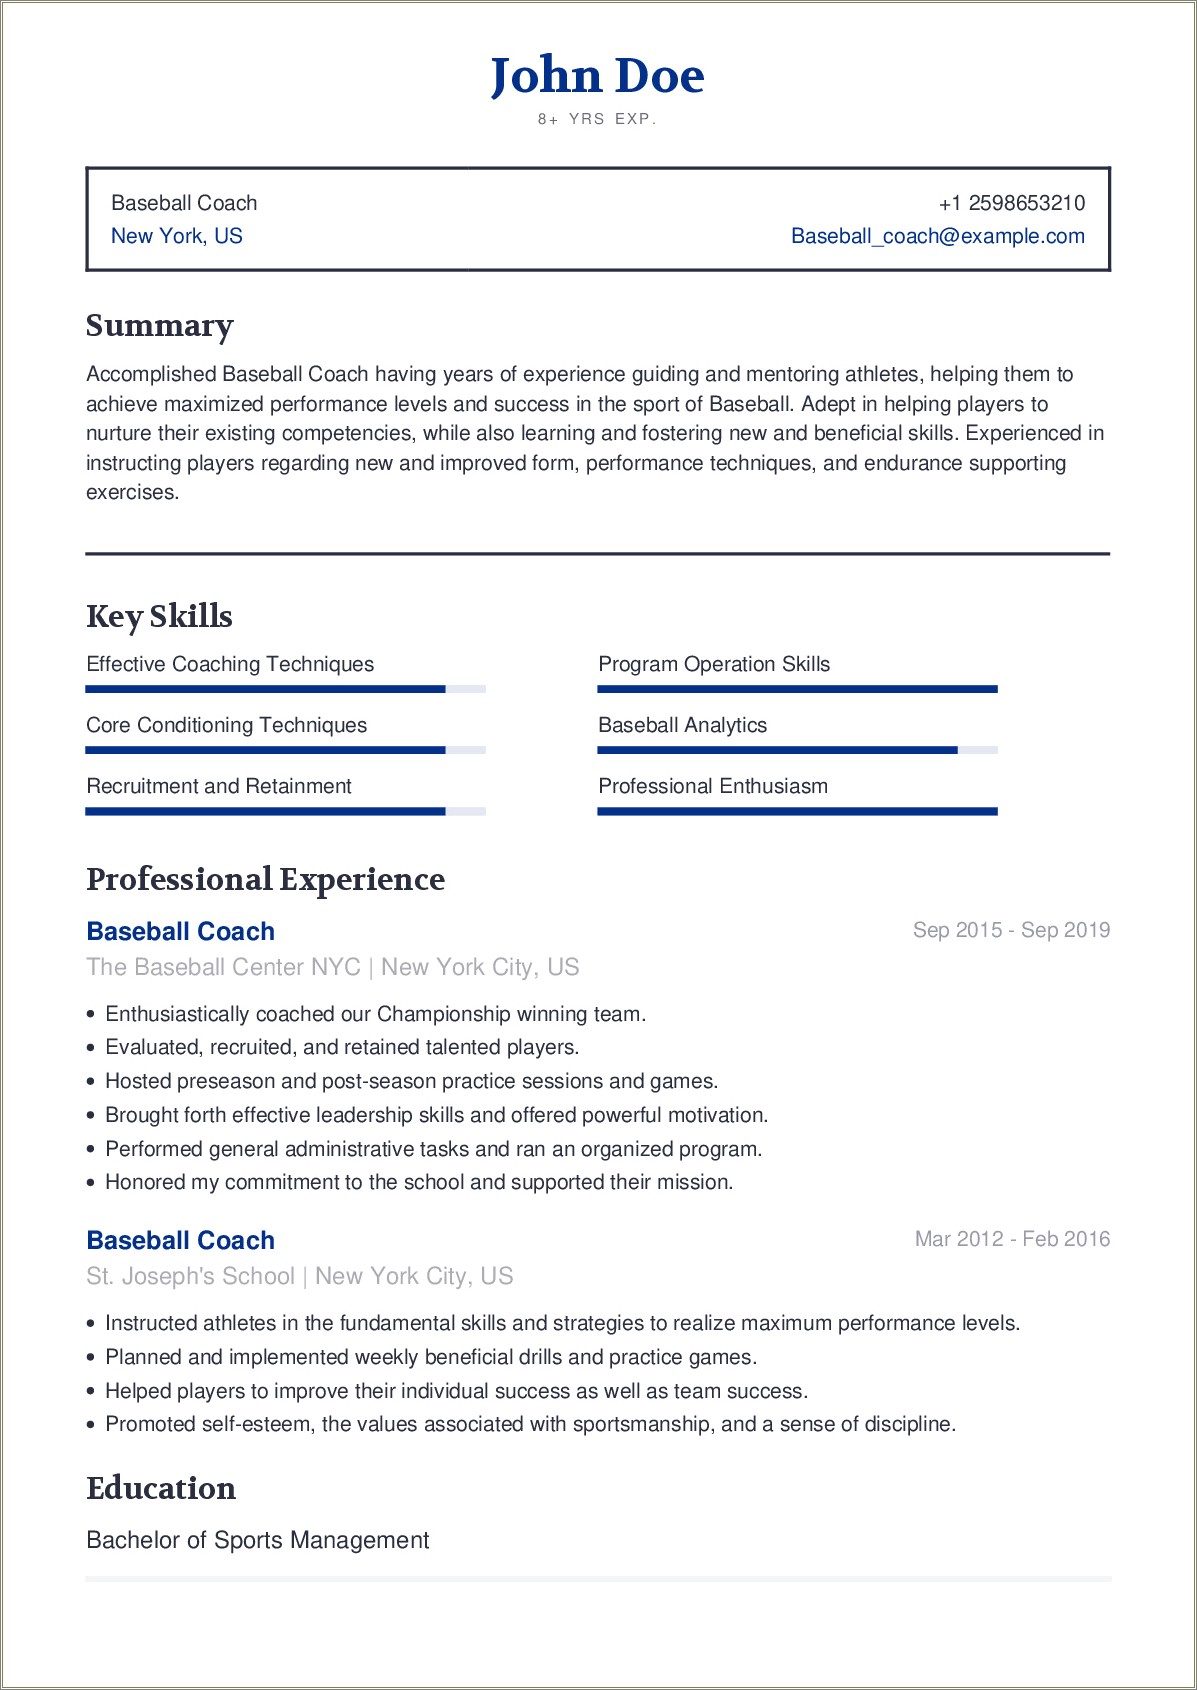 Professional Summary On Resume For Professional Baseball Player